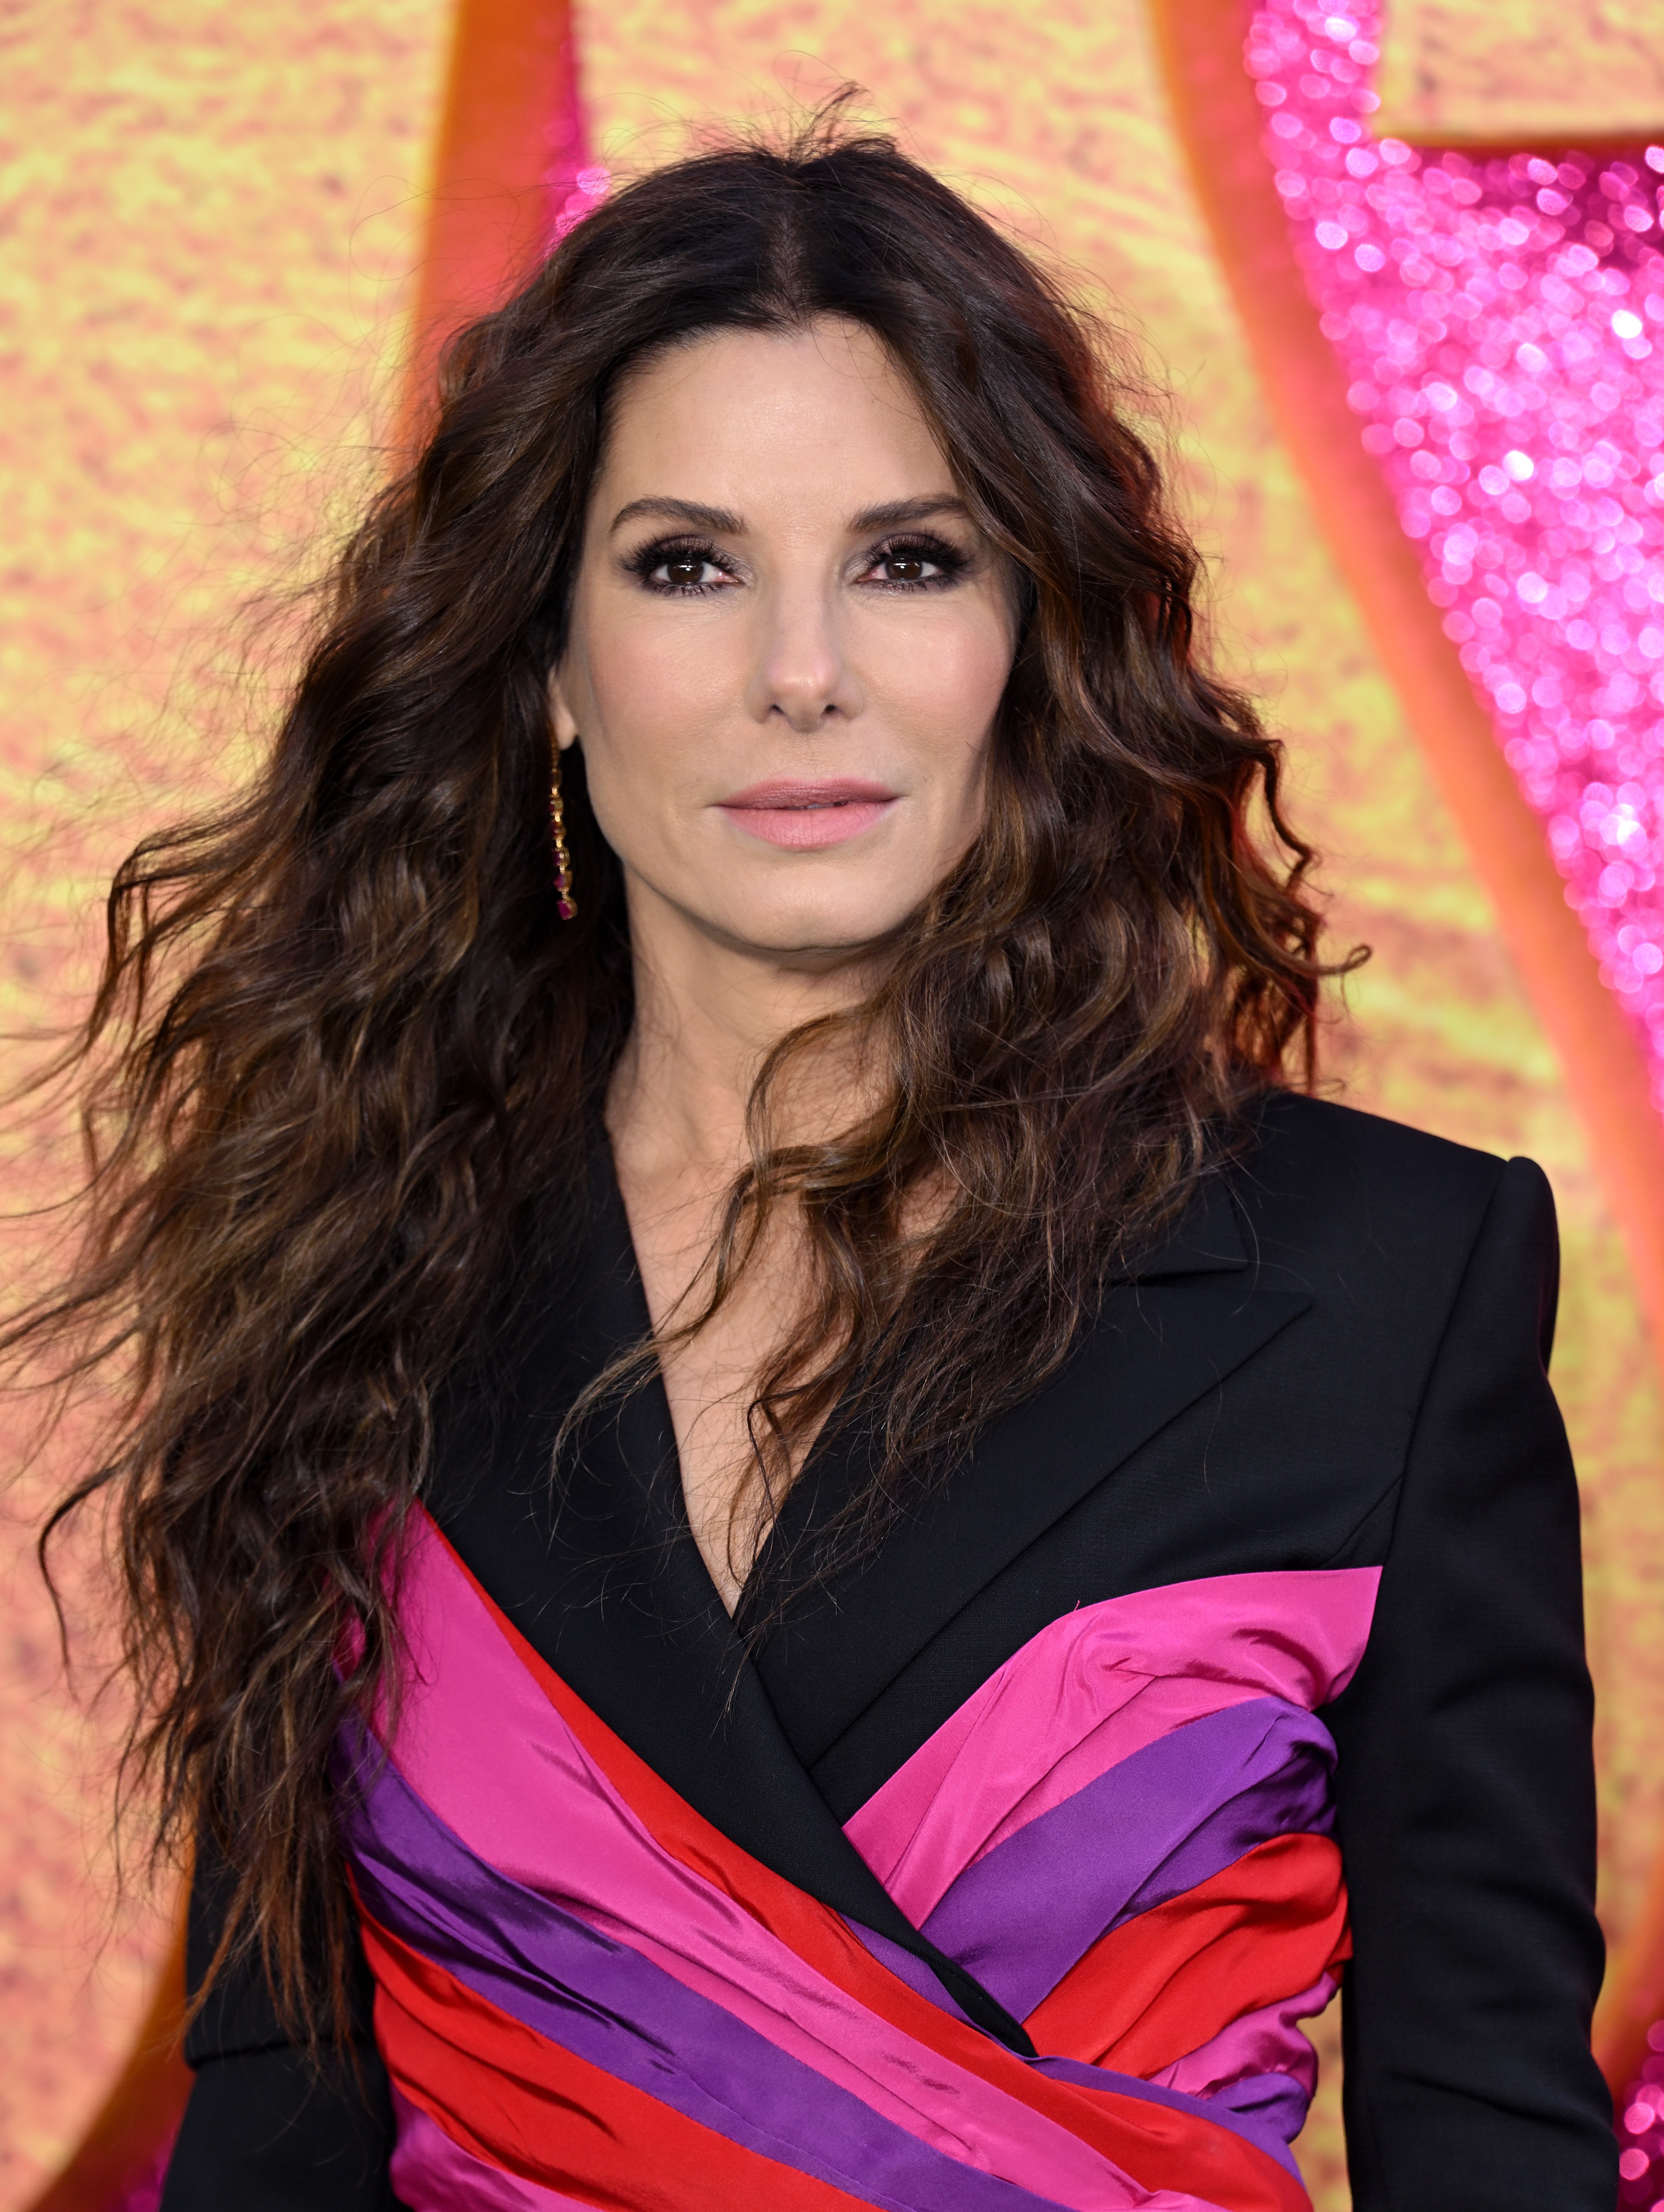 LONDON, ENGLAND - MARCH 31: Sandra Bullock attends the UK screening of "The Lost City" at Cineworld Leicester Square on March 31, 2022 in London, England. (Photo by Karwai Tang/WireImage) (Foto: WireImage)